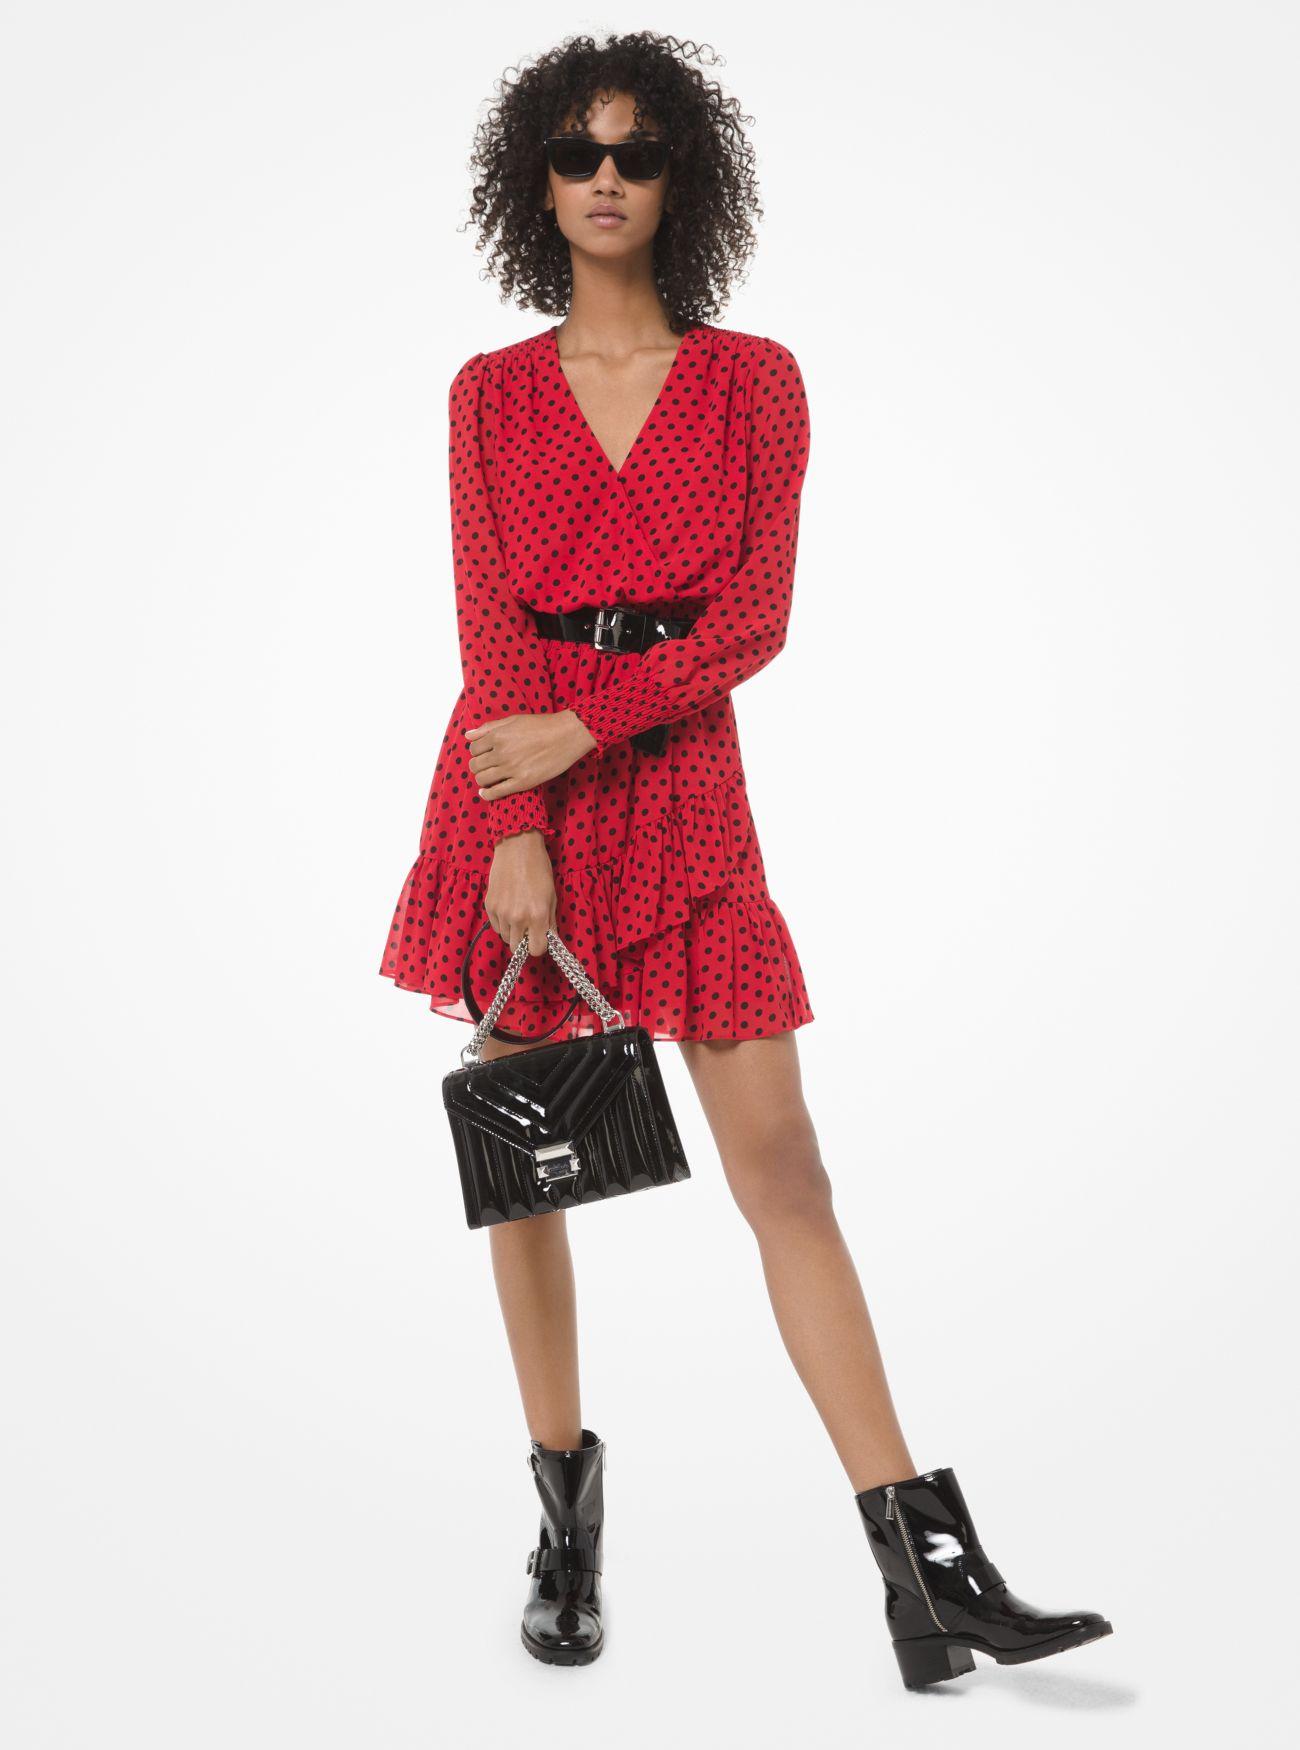 afdeling pris næse Michael Kors Leather Dot Georgette Ruffle Dress in Red - Lyst